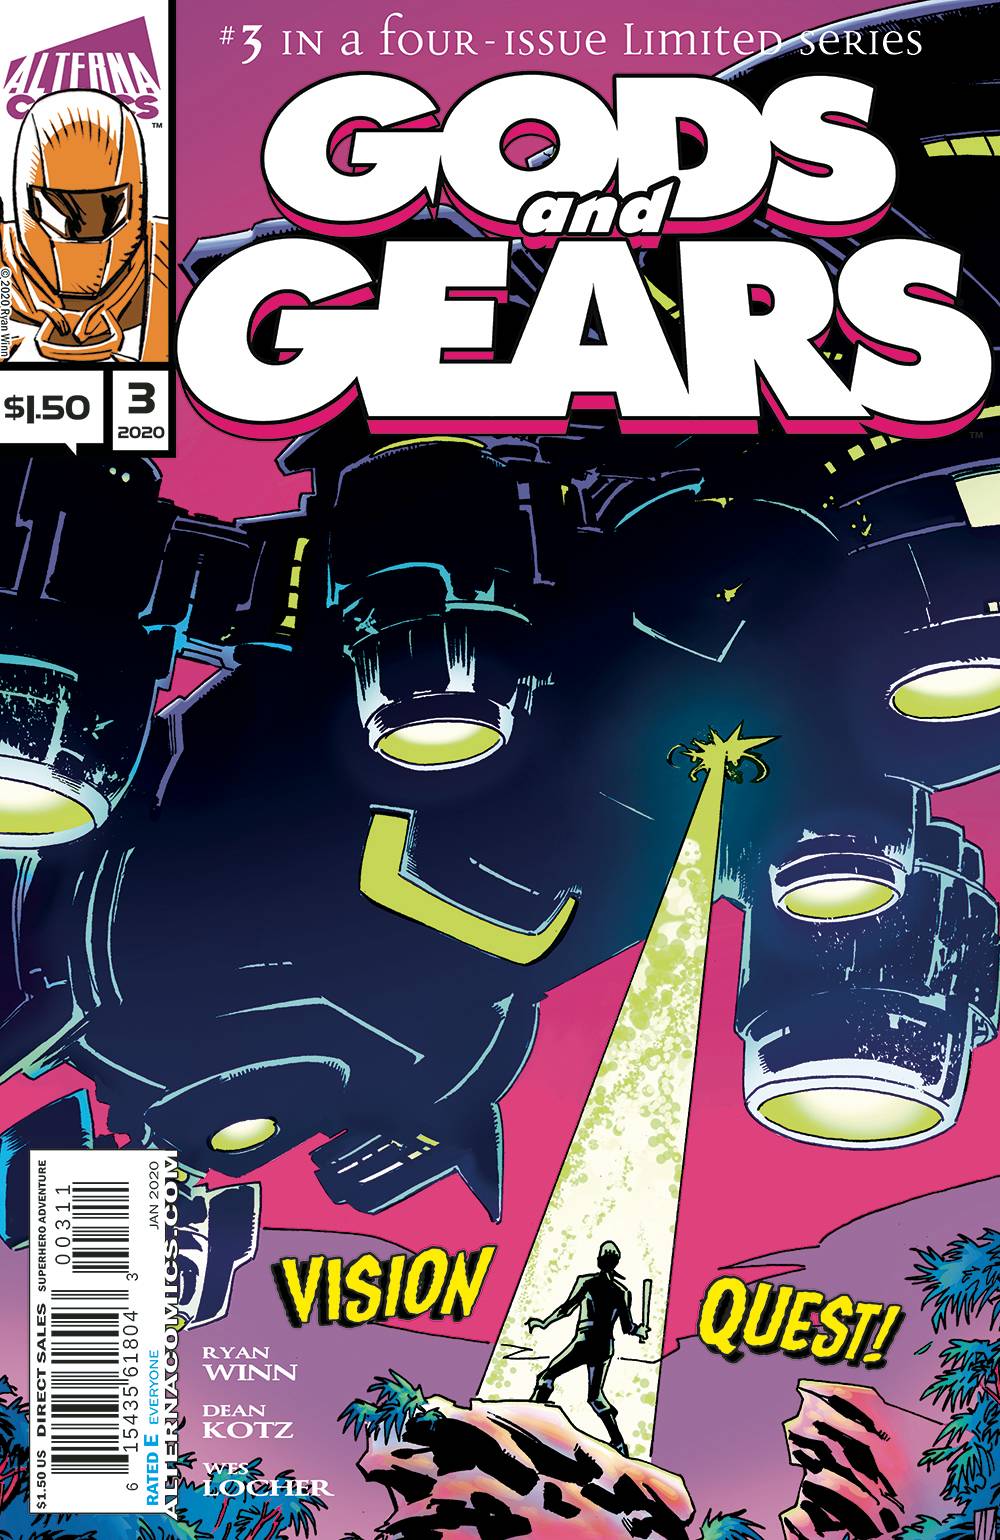 Gods and Gears #3 (2020)